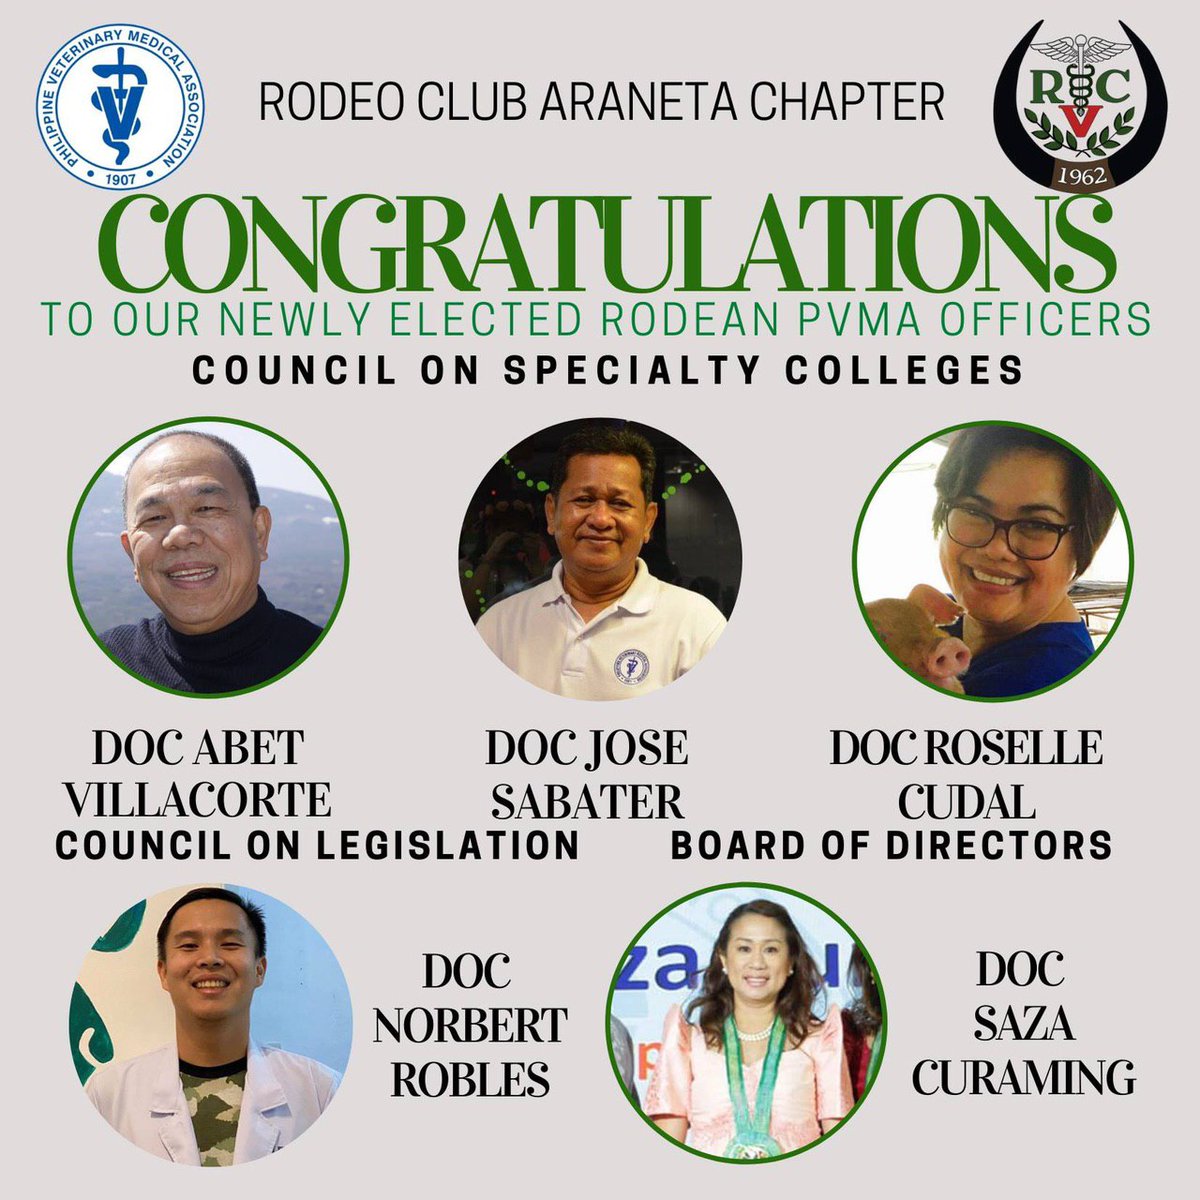 The PVMA has announced its new set of officers for this year! Rodeo Club congratulates our brods and sisses for winning the positions they ran for!! We are so proud of you, Rodeans! May your reign achieve the aspirations you've dreamed for the PVMA! #LiveTheLegacy 🏇🥰💚💚